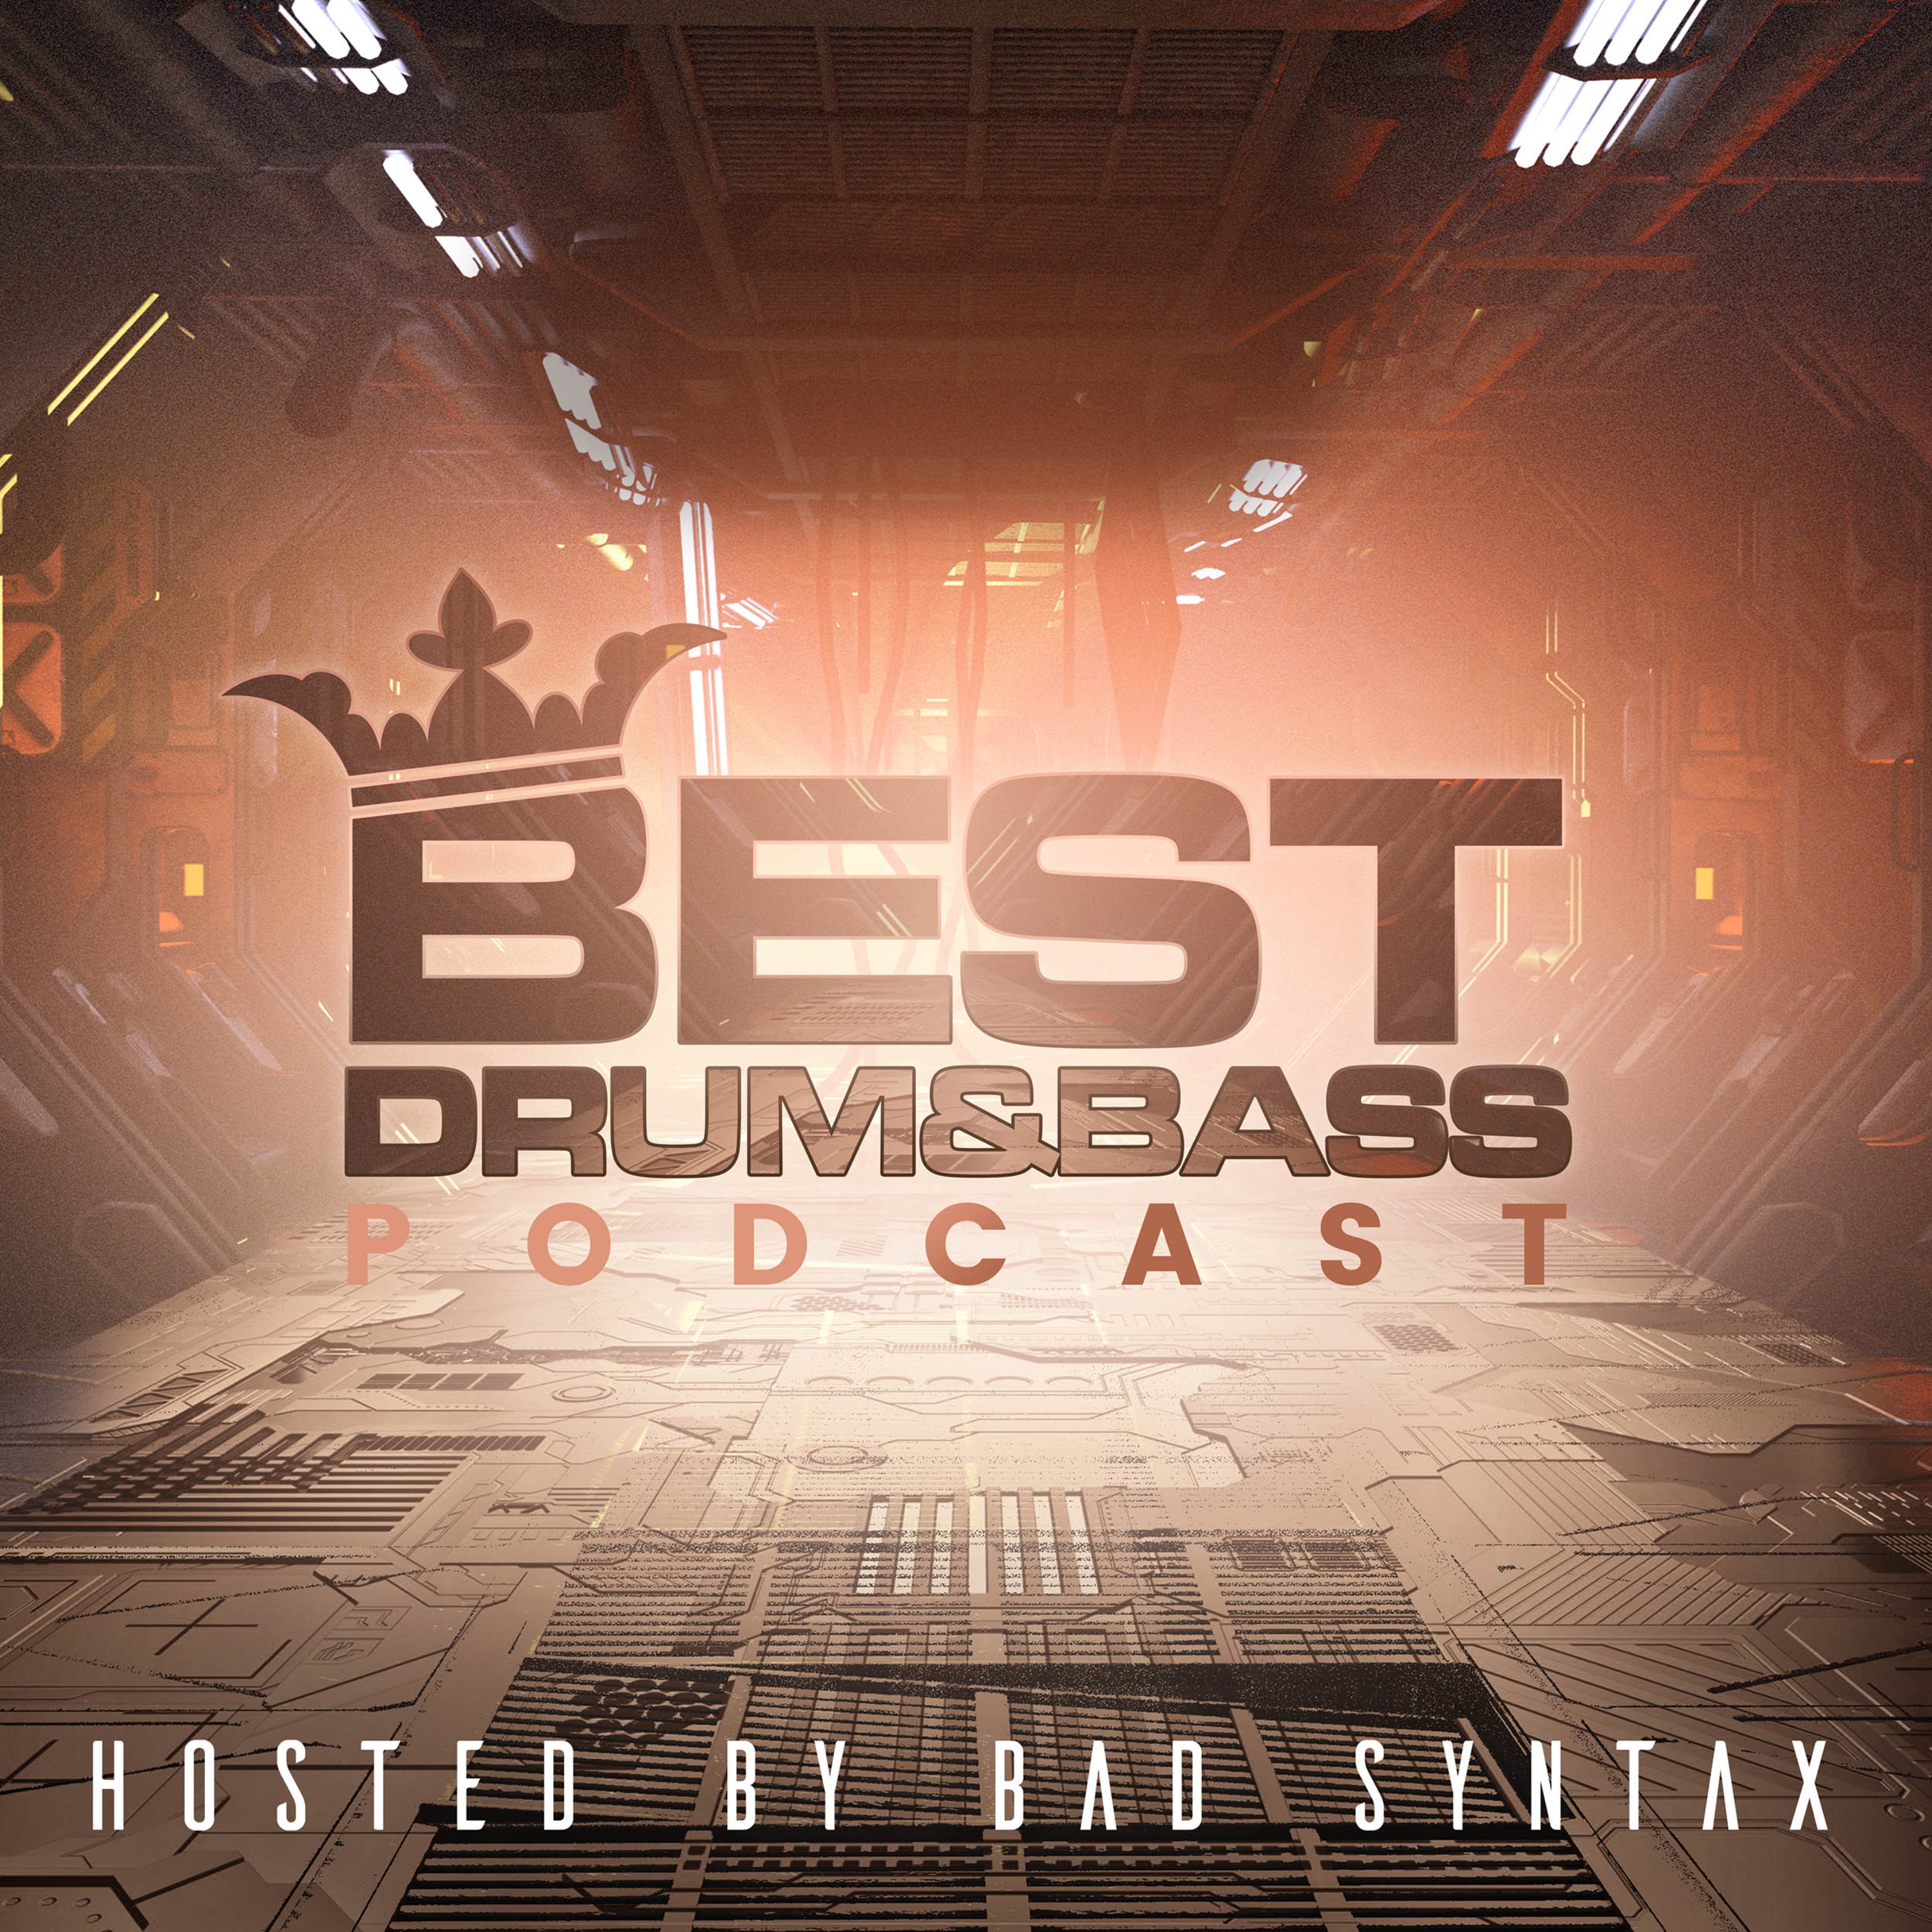 Podcast 487 - Bad Syntax & Kinetik cover art